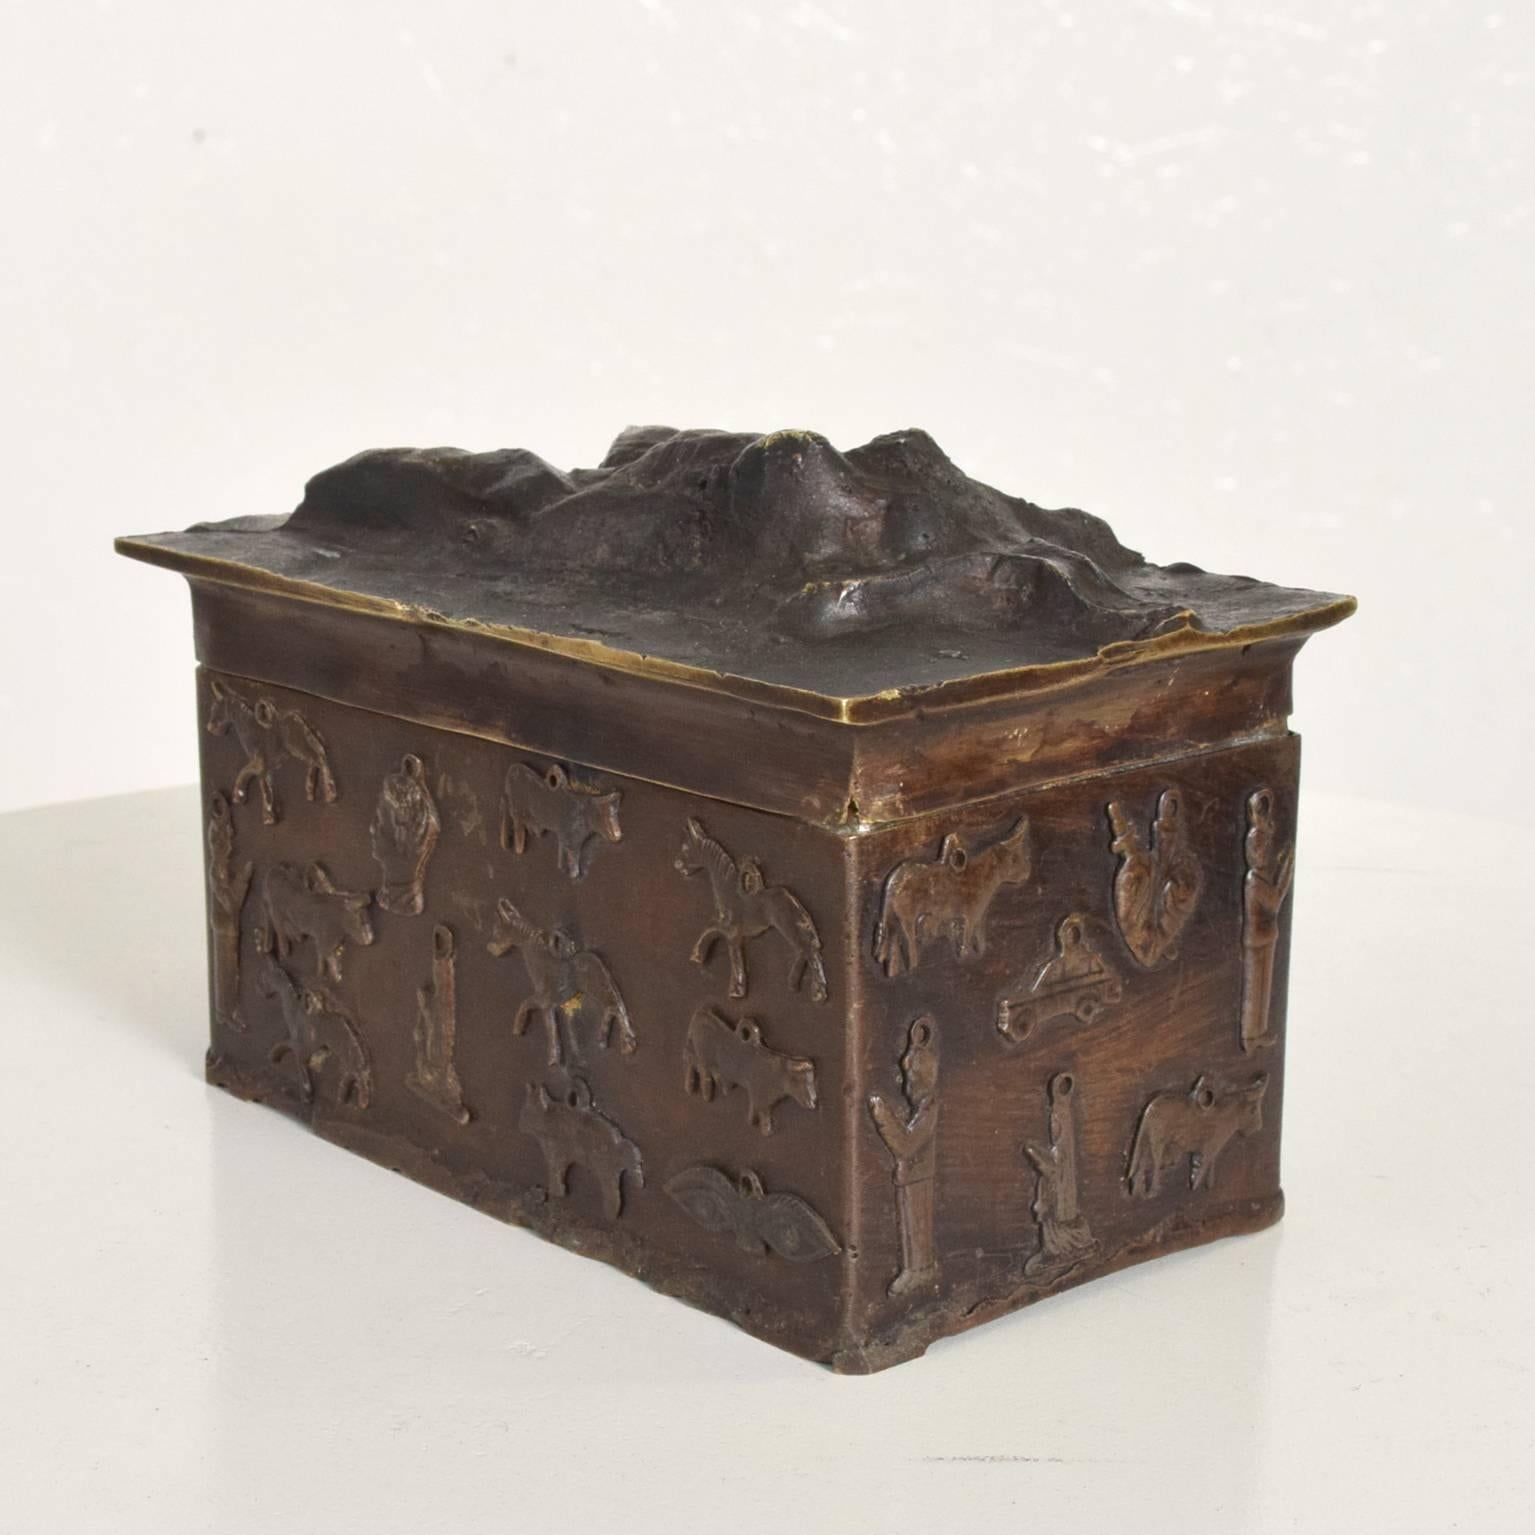 For your consideration, a decorative bronze box signed 